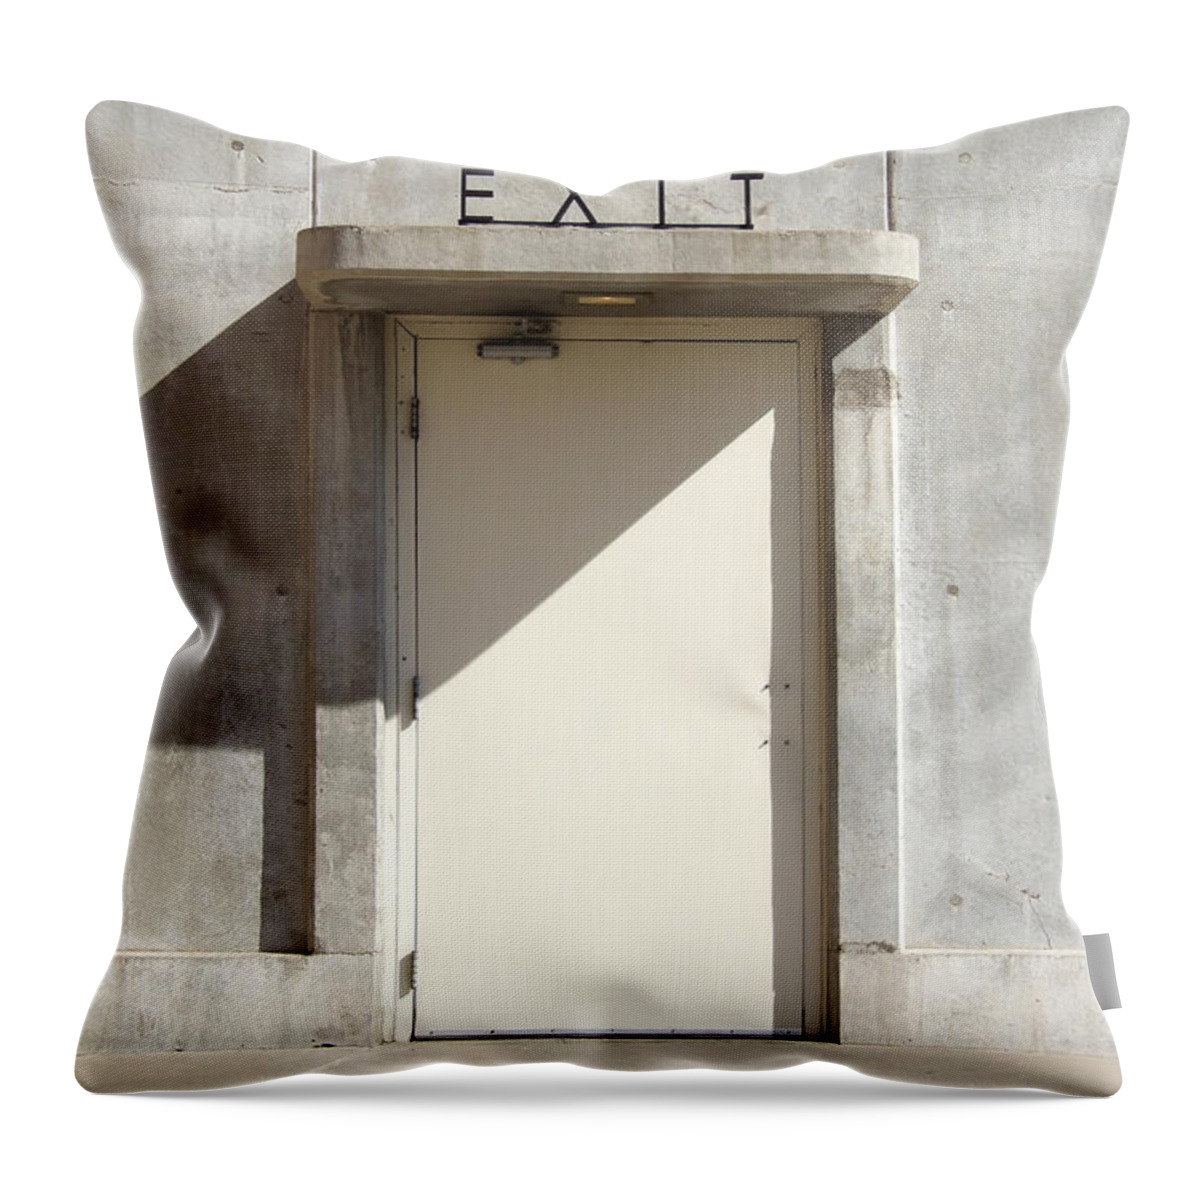 Exit Throw Pillow featuring the photograph Exit by Mike McGlothlen